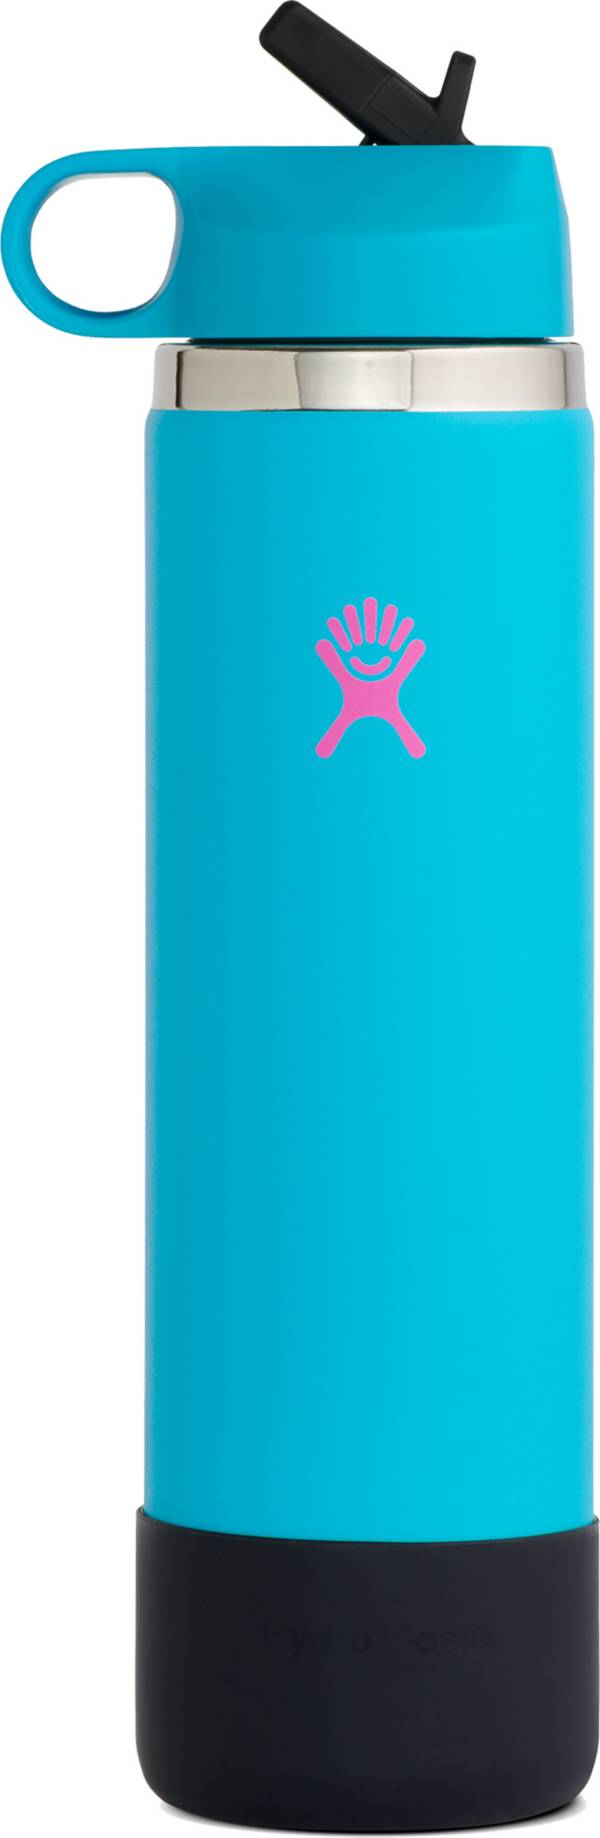 Hydro Flask Elevate Series 24 oz. Wide Mouth Bottle with Straw Lid product image